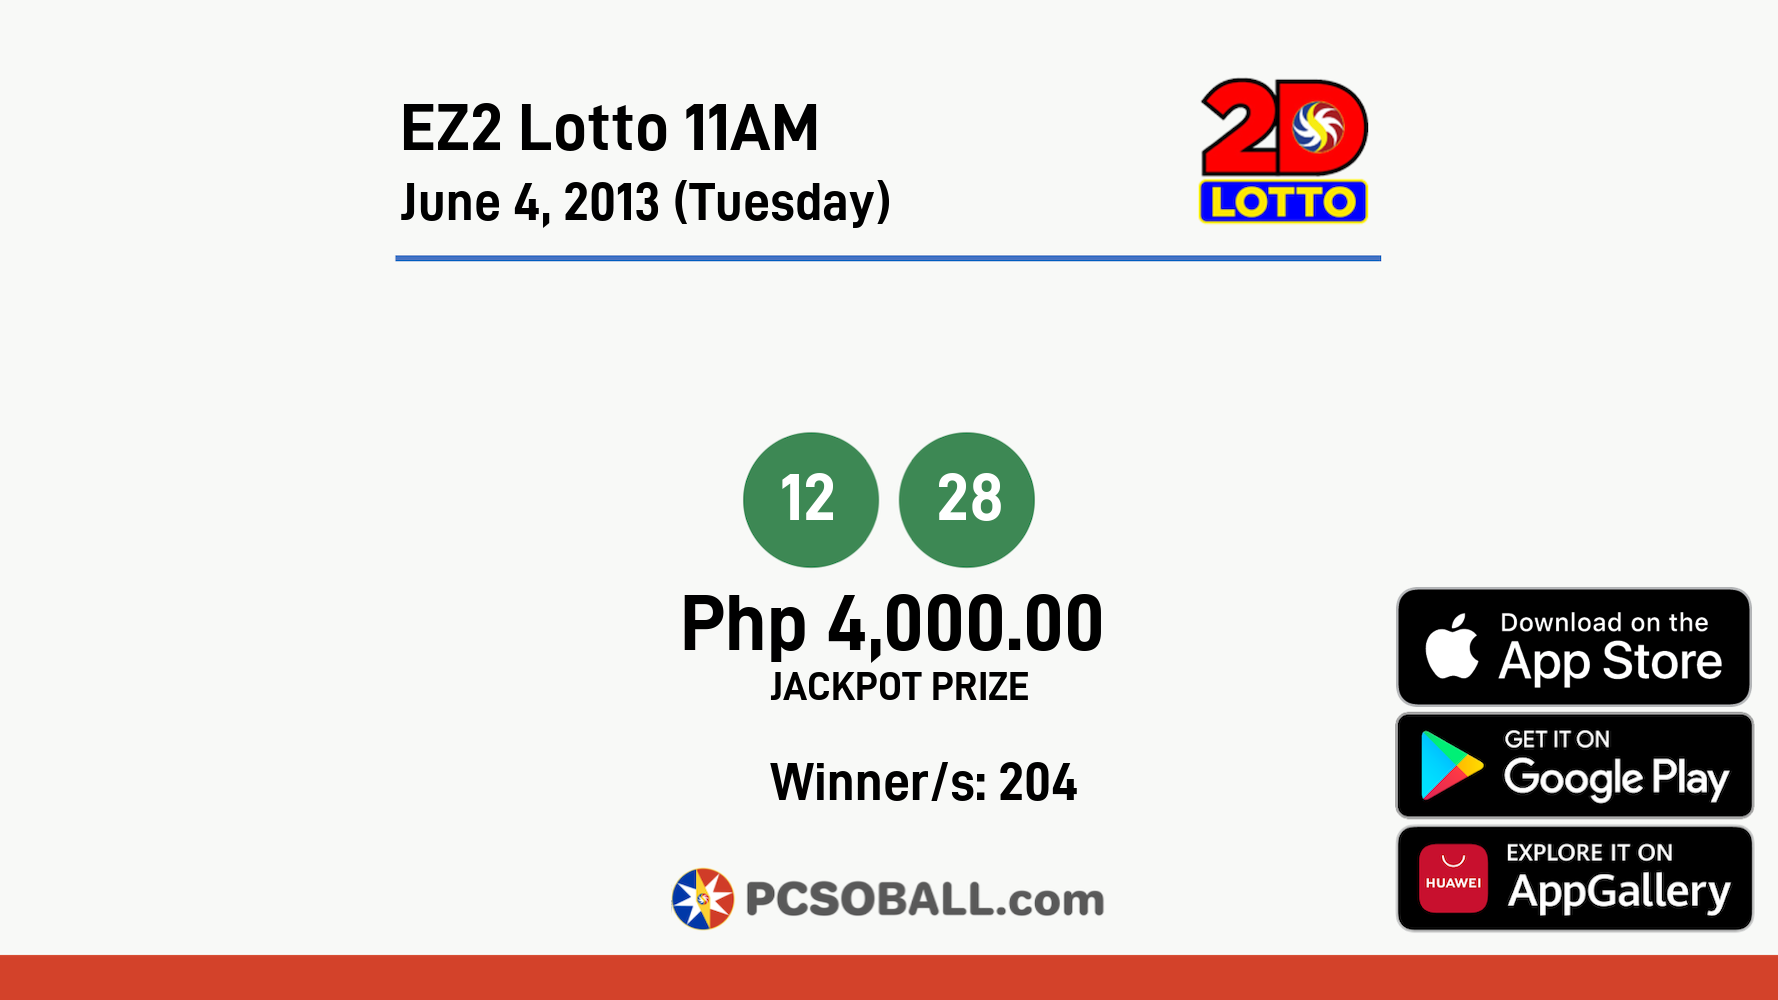 EZ2 Lotto 11AM June 4, 2013 (Tuesday) Result